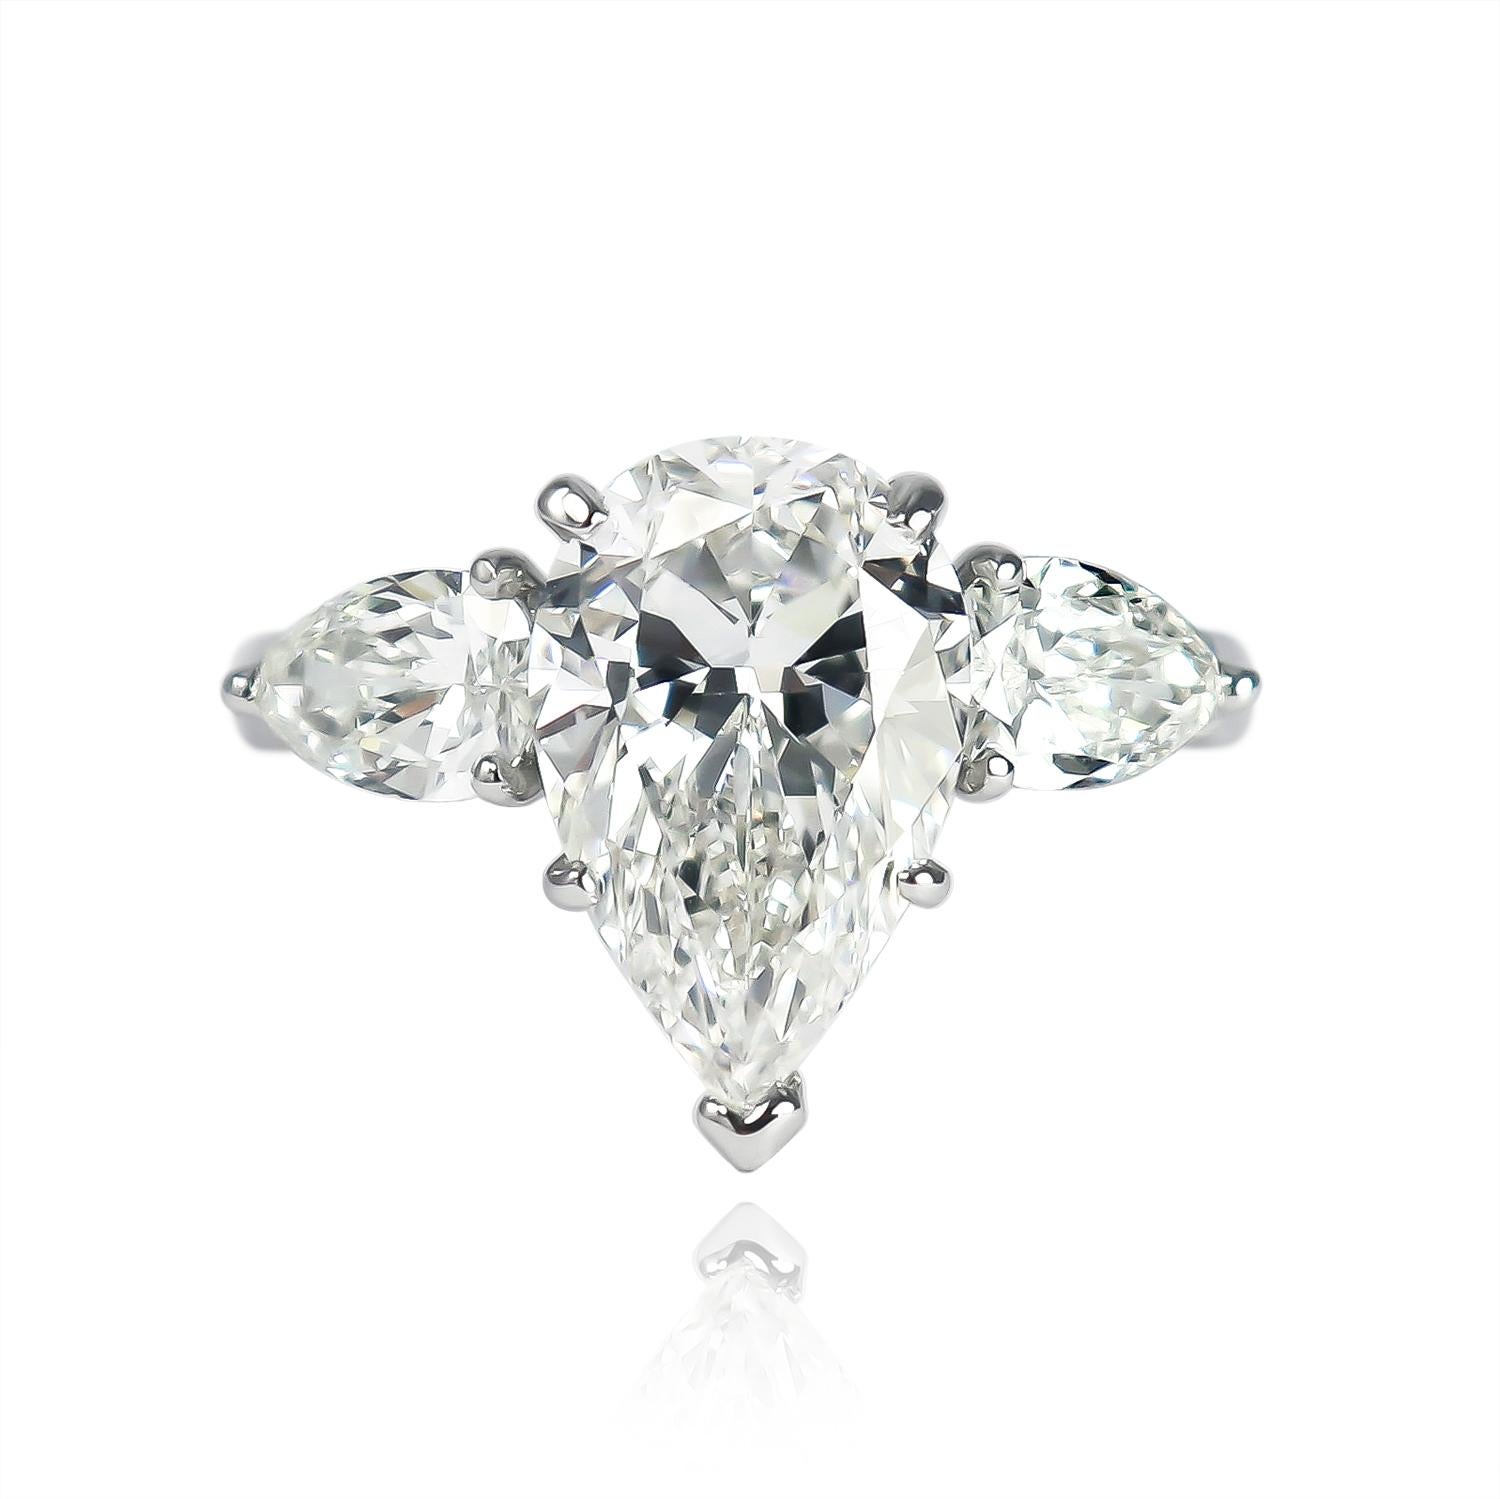 This bold, three-stone ring from the J. Birnbach vault features a GIA certified 4.03 carat pear brilliant cut diamond of G color and VS1 clarity as described by GIA grading report #2151107253. With excellent polish and very good symmetry, this